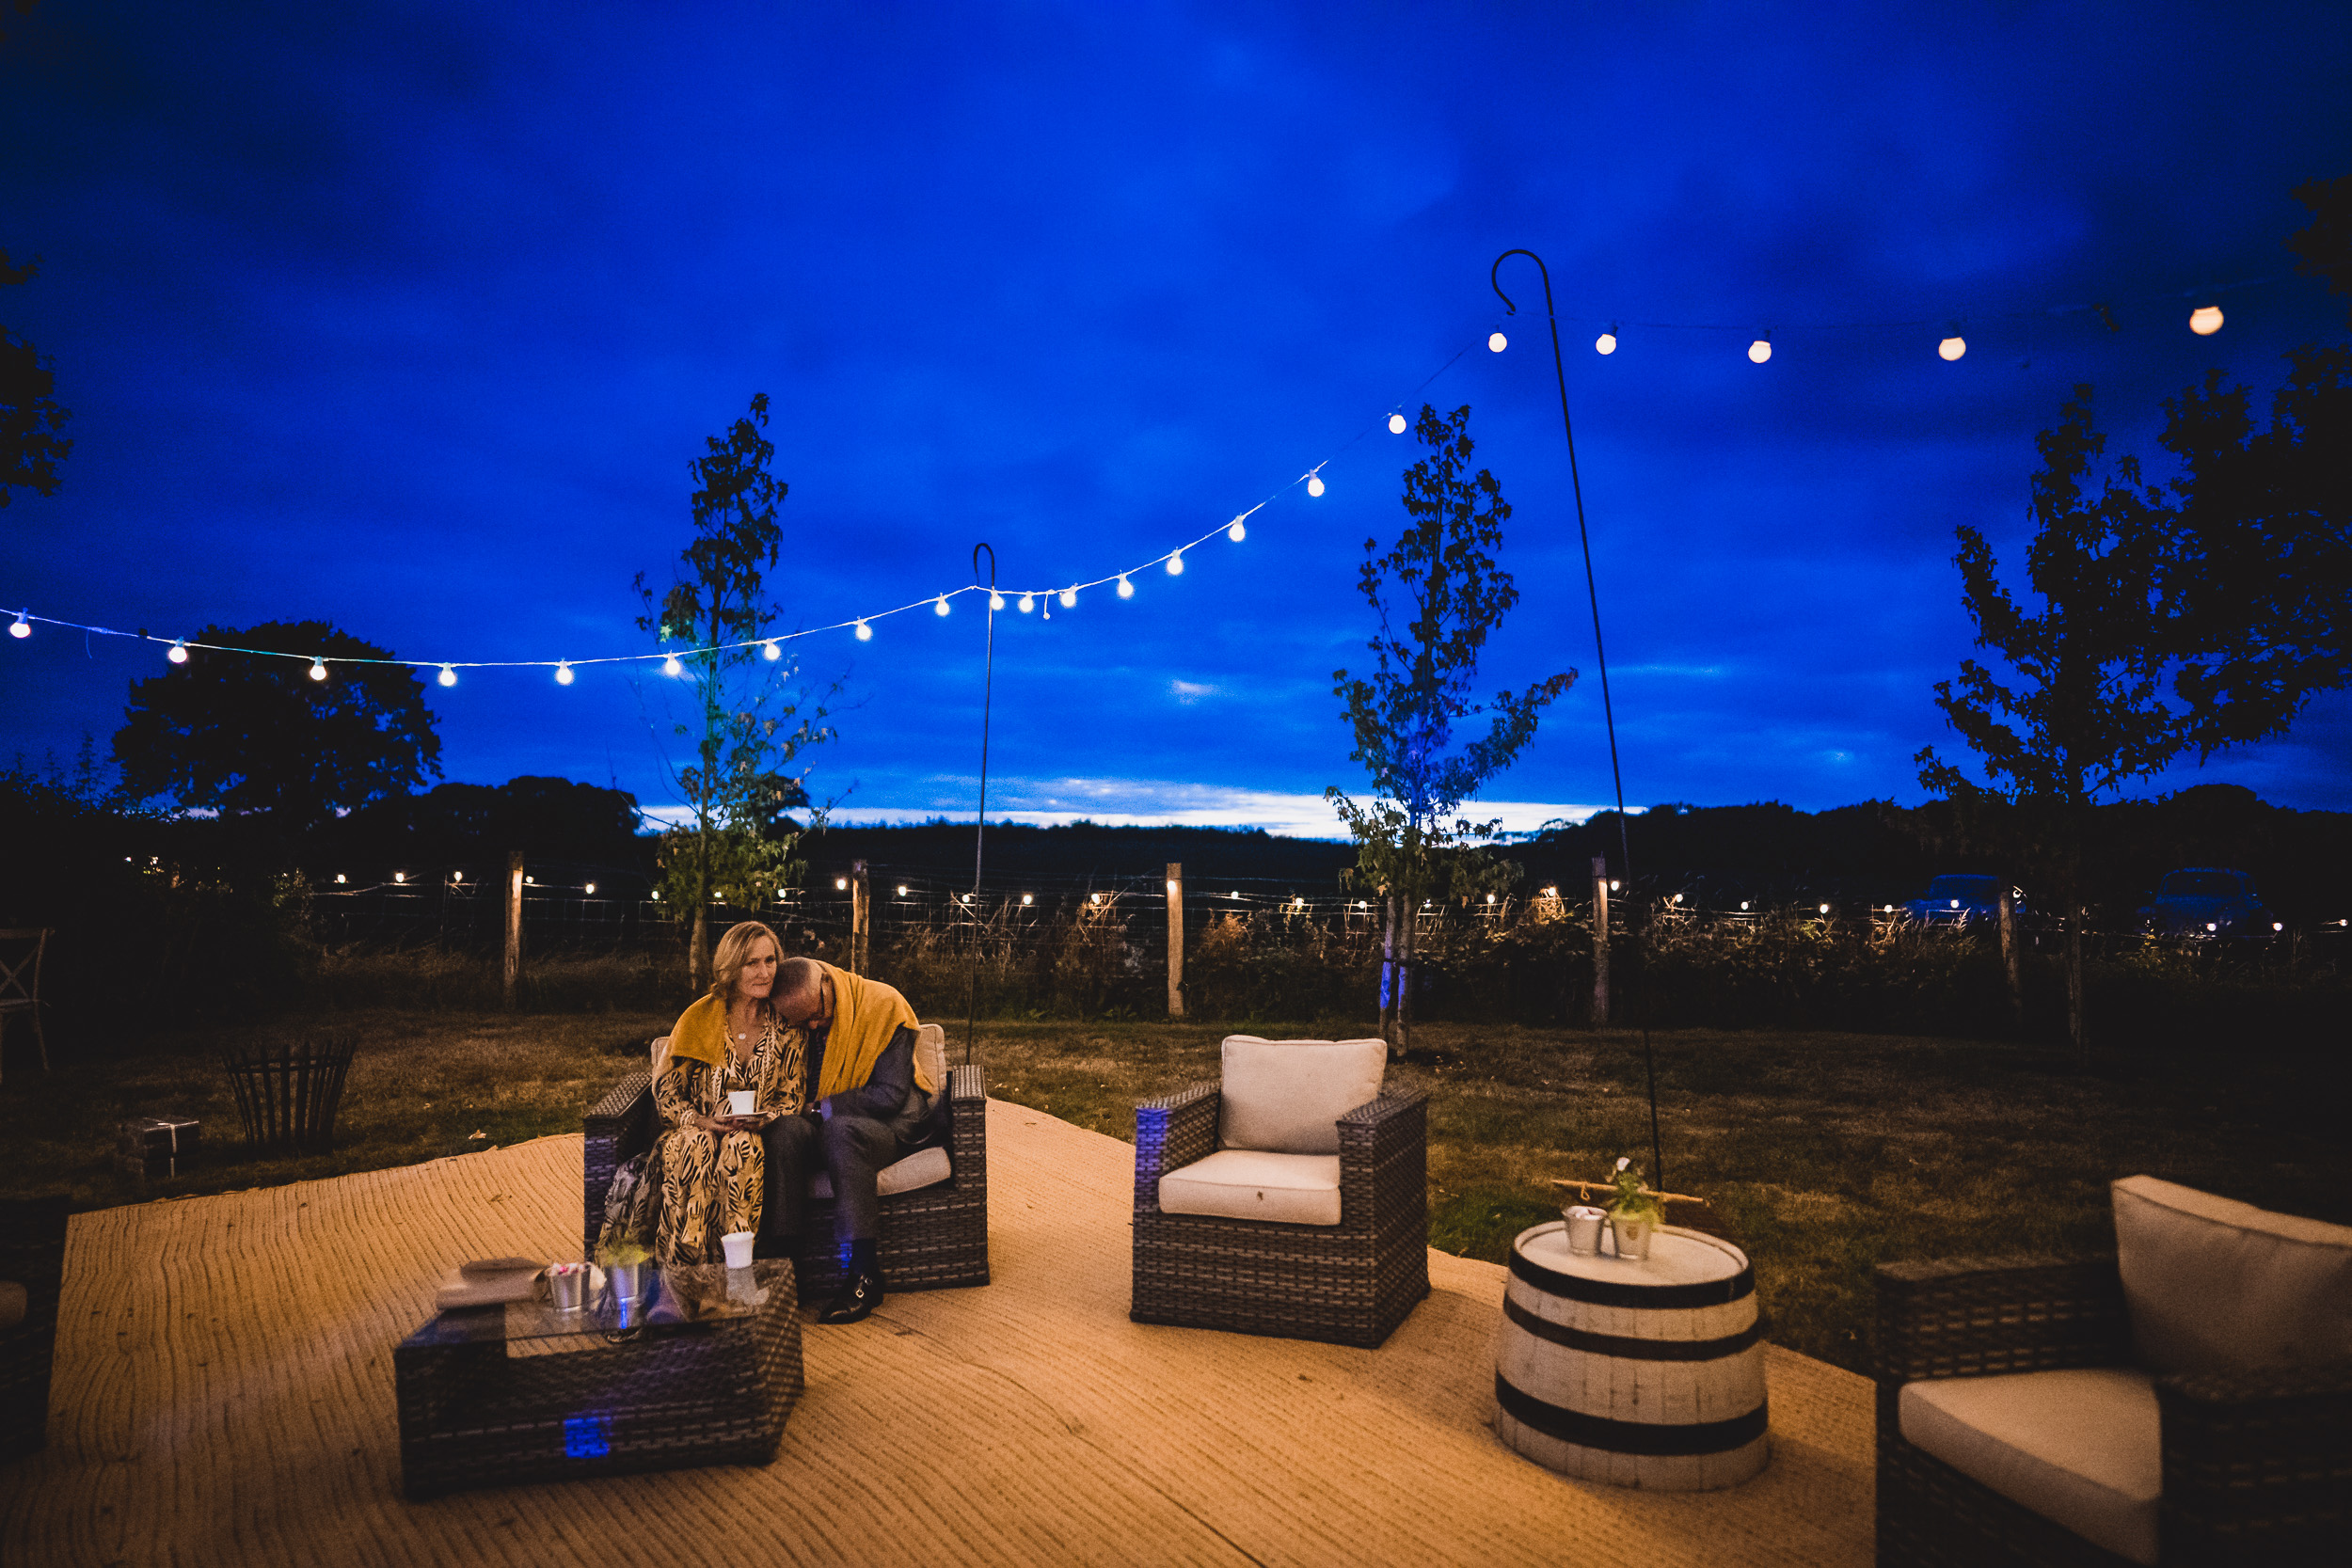 A bride and groom sit on a patio under string lights at dusk, captured by their wedding photographer.